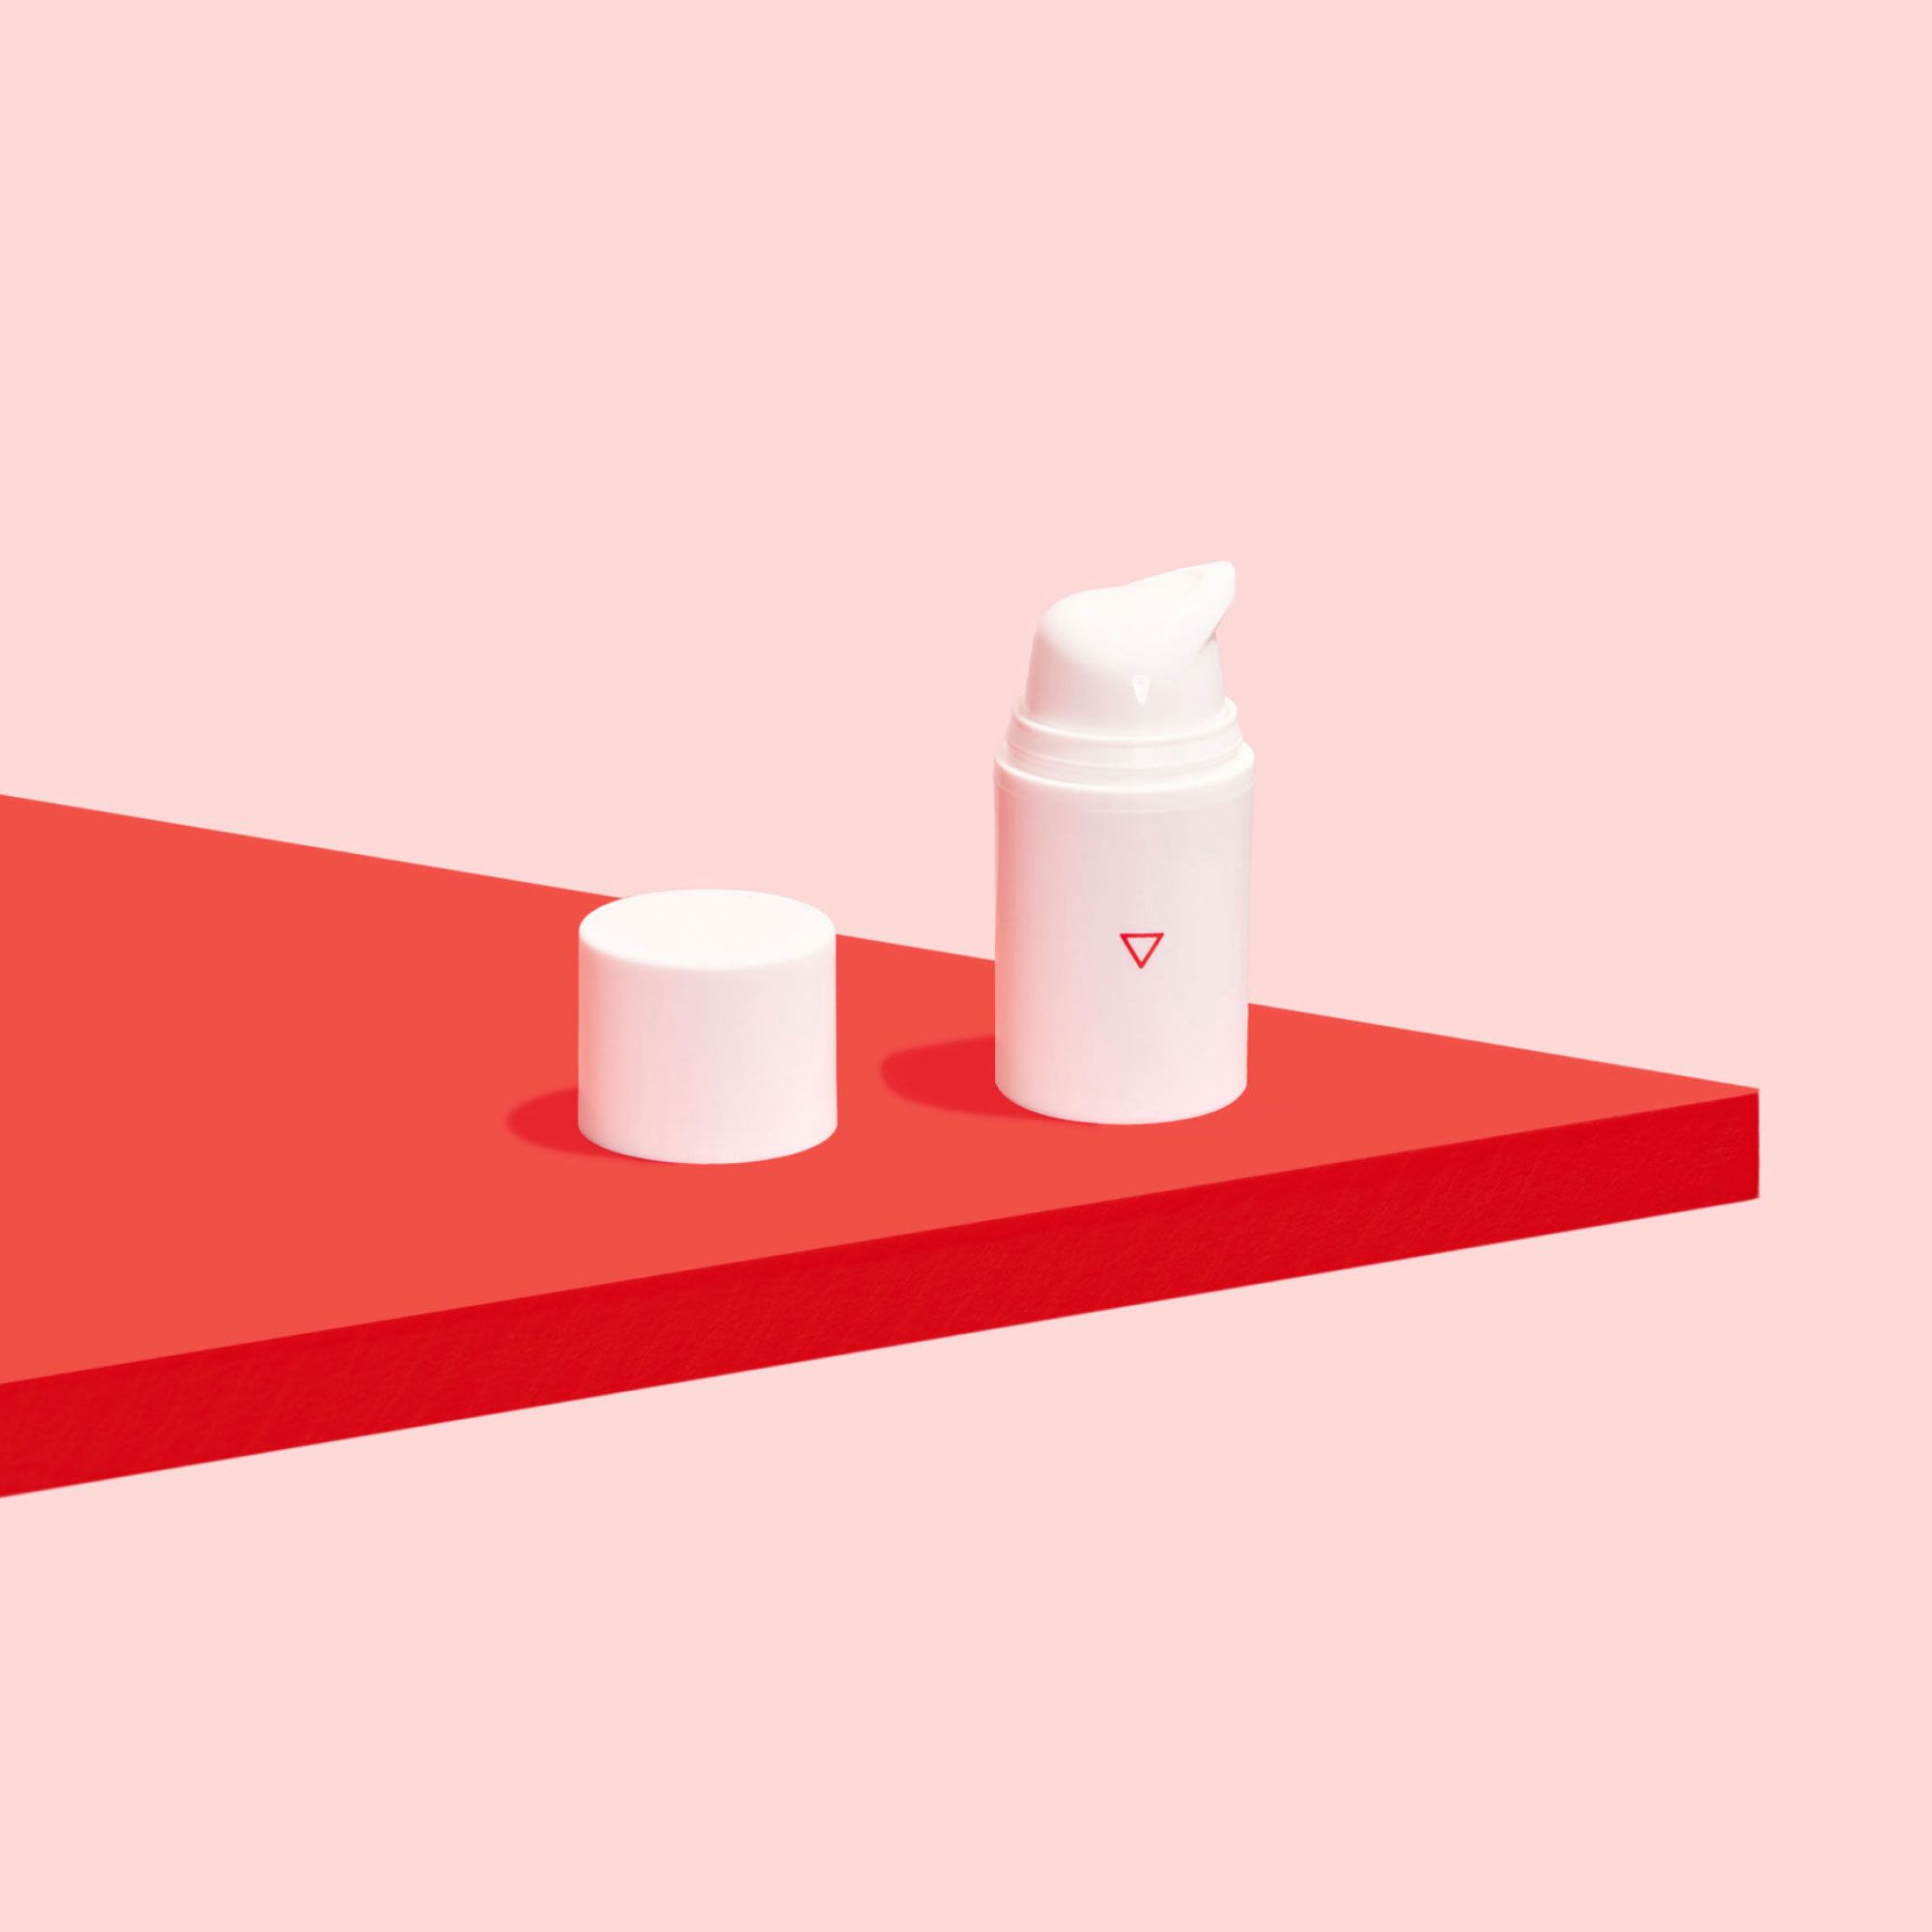 Bottle of Acyclovir cream to treat oral and genital herpes on a pink background and red surface